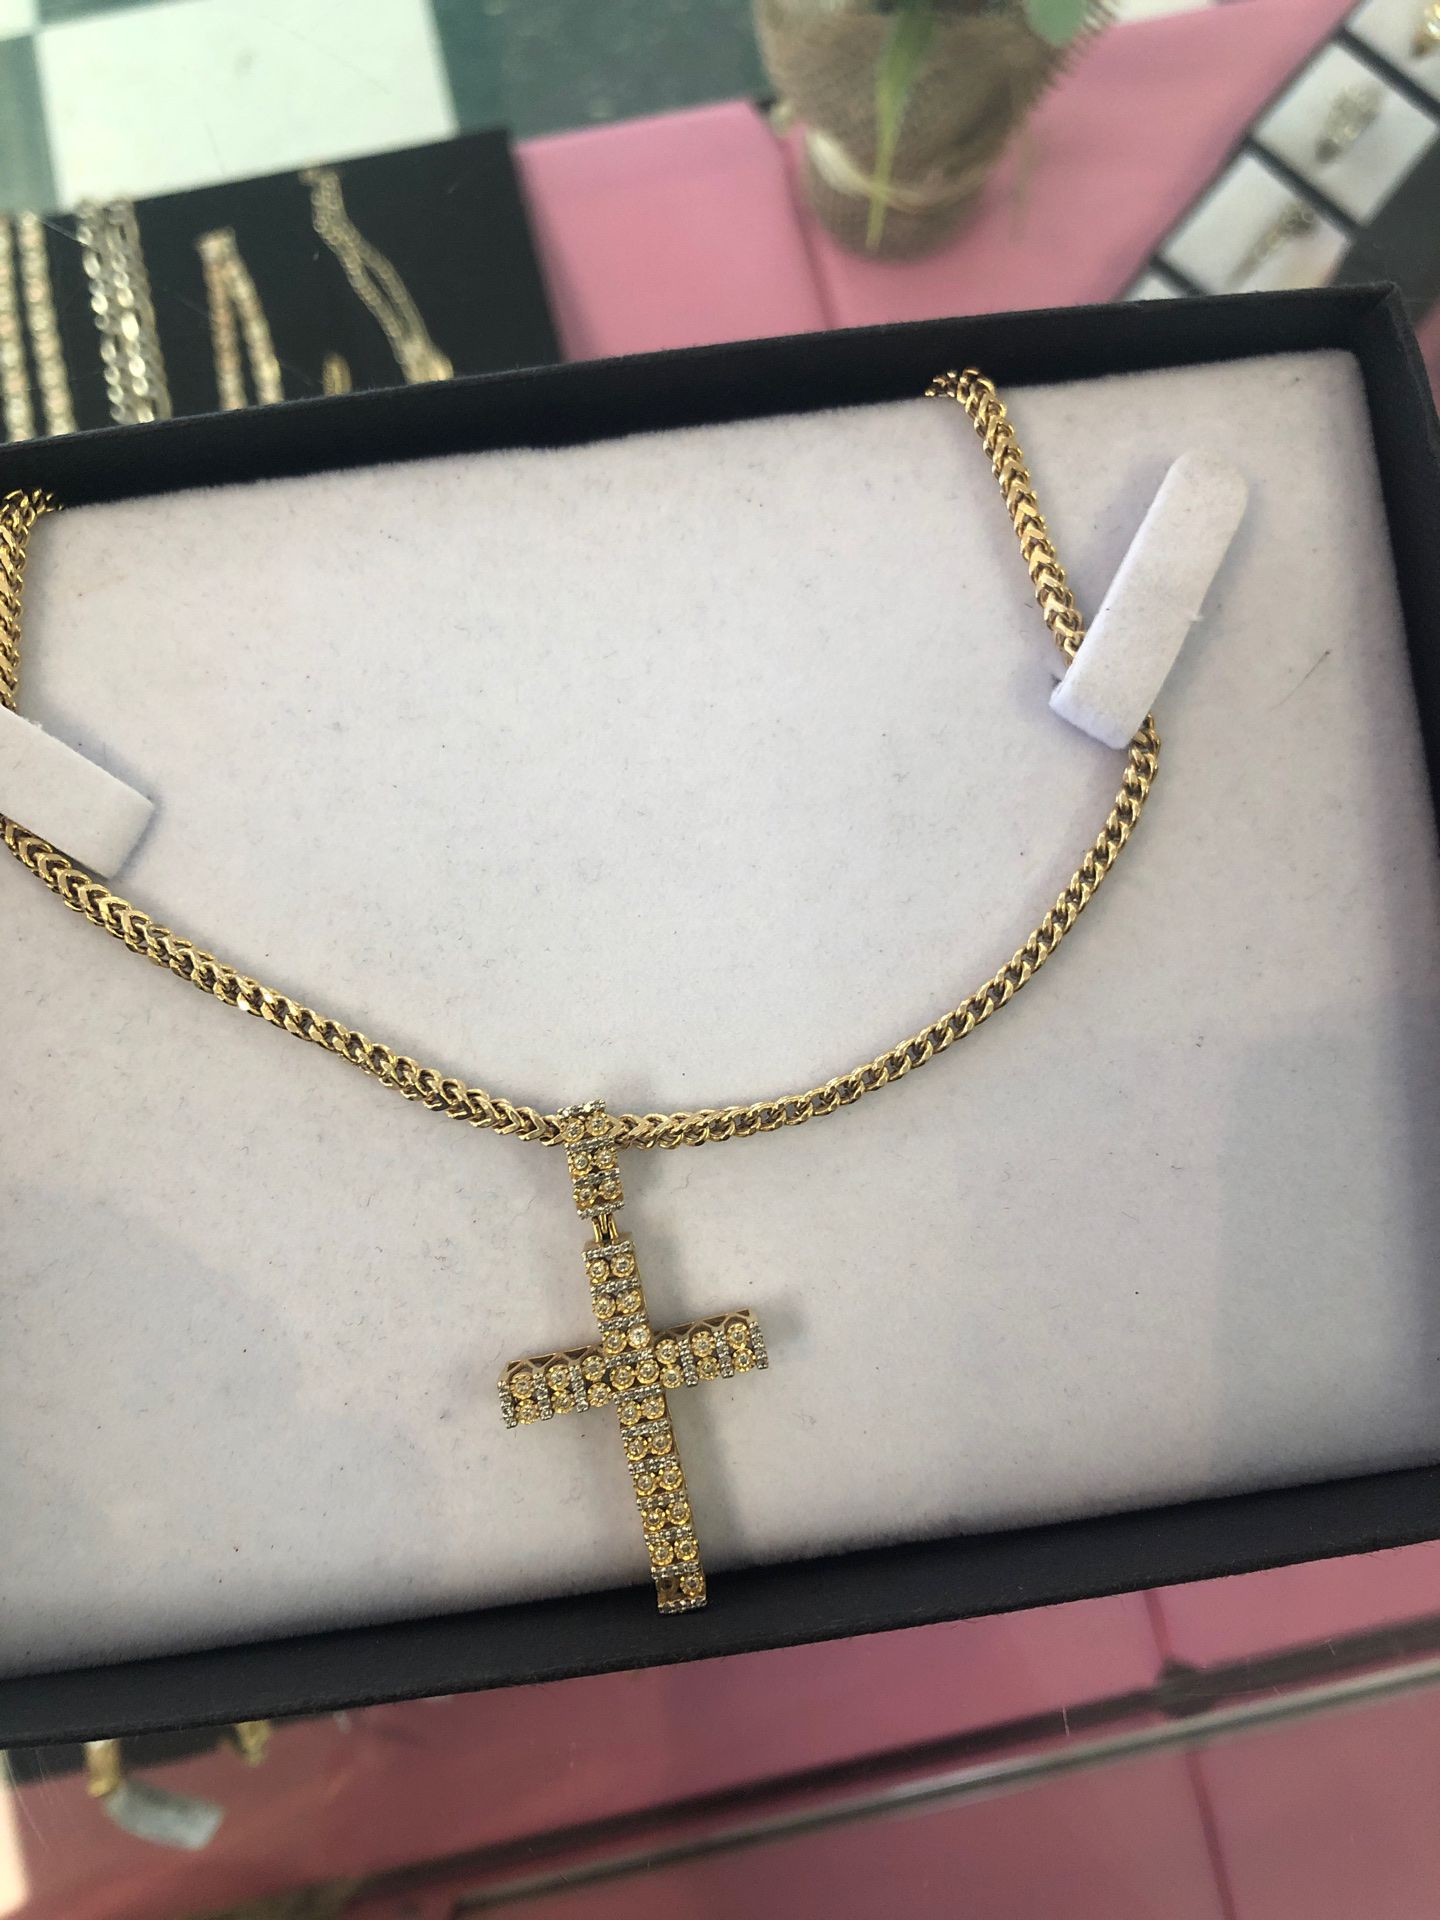 10k gold pendant chain and cross